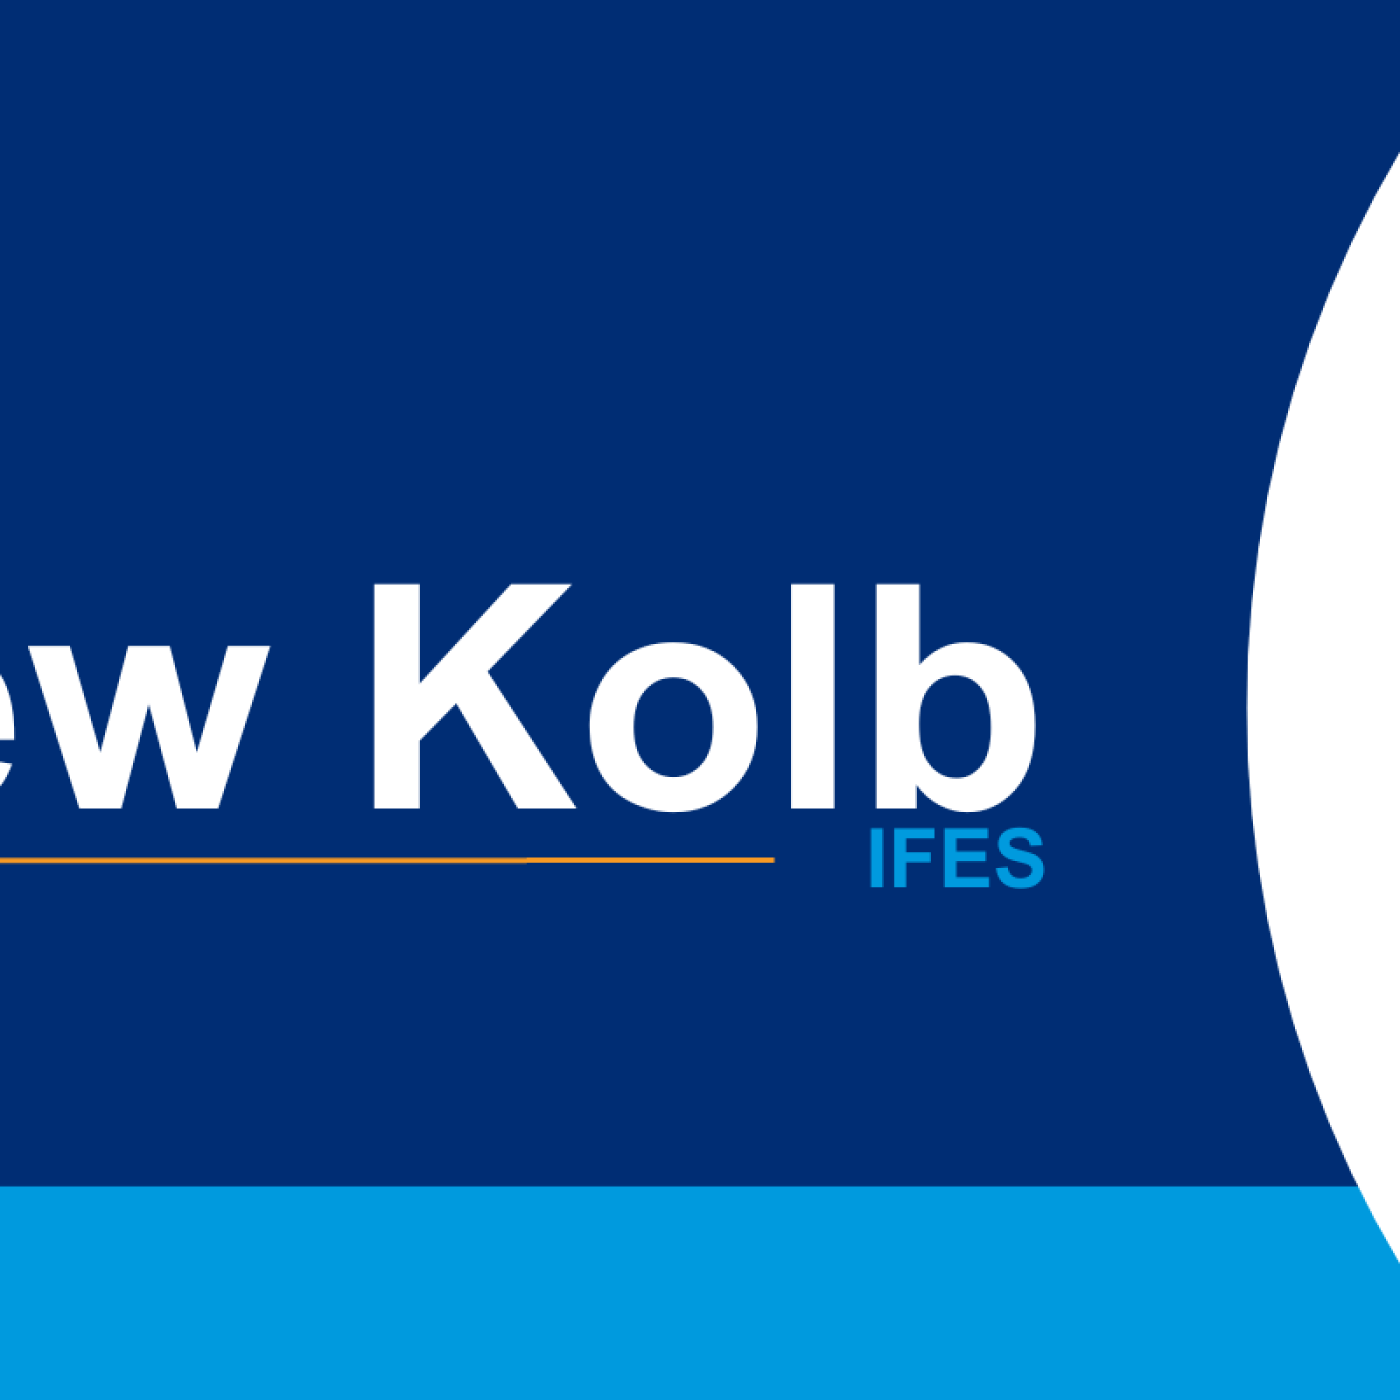 Graphic displaying dark blue, light blue, white and gold elements with white text reading "Andrew Kolb, IFES" and a headshot of a man on the far right.